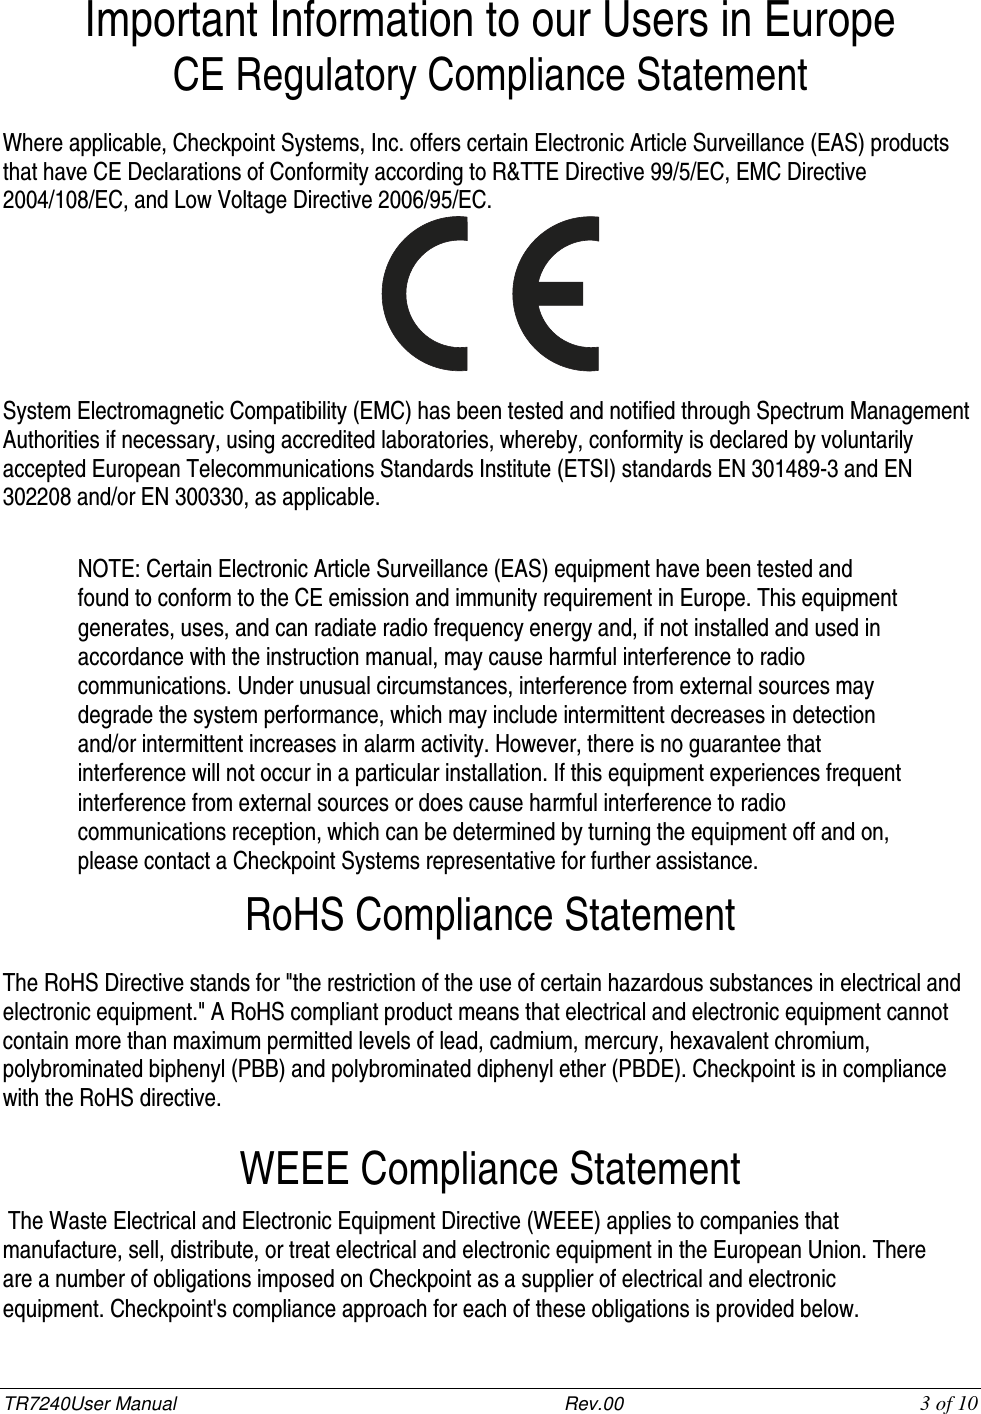 TR7240User Manual                           Rev.00   3 of 10 Important Information to our Users in Europe CE Regulatory Compliance Statement  Where applicable, Checkpoint Systems, Inc. offers certain Electronic Article Surveillance (EAS) products that have CE Declarations of Conformity according to R&amp;TTE Directive 99/5/EC, EMC Directive 2004/108/EC, and Low Voltage Directive 2006/95/EC.   System Electromagnetic Compatibility (EMC) has been tested and notified through Spectrum Management Authorities if necessary, using accredited laboratories, whereby, conformity is declared by voluntarily accepted European Telecommunications Standards Institute (ETSI) standards EN 301489-3 and EN 302208 and/or EN 300330, as applicable.  NOTE: Certain Electronic Article Surveillance (EAS) equipment have been tested and found to conform to the CE emission and immunity requirement in Europe. This equipment generates, uses, and can radiate radio frequency energy and, if not installed and used in accordance with the instruction manual, may cause harmful interference to radio communications. Under unusual circumstances, interference from external sources may degrade the system performance, which may include intermittent decreases in detection and/or intermittent increases in alarm activity. However, there is no guarantee that interference will not occur in a particular installation. If this equipment experiences frequent interference from external sources or does cause harmful interference to radio communications reception, which can be determined by turning the equipment off and on, please contact a Checkpoint Systems representative for further assistance. RoHS Compliance Statement  The RoHS Directive stands for &quot;the restriction of the use of certain hazardous substances in electrical and electronic equipment.&quot; A RoHS compliant product means that electrical and electronic equipment cannot contain more than maximum permitted levels of lead, cadmium, mercury, hexavalent chromium, polybrominated biphenyl (PBB) and polybrominated diphenyl ether (PBDE). Checkpoint is in compliance with the RoHS directive.  WEEE Compliance Statement  The Waste Electrical and Electronic Equipment Directive (WEEE) applies to companies that manufacture, sell, distribute, or treat electrical and electronic equipment in the European Union. There are a number of obligations imposed on Checkpoint as a supplier of electrical and electronic equipment. Checkpoint&apos;s compliance approach for each of these obligations is provided below.